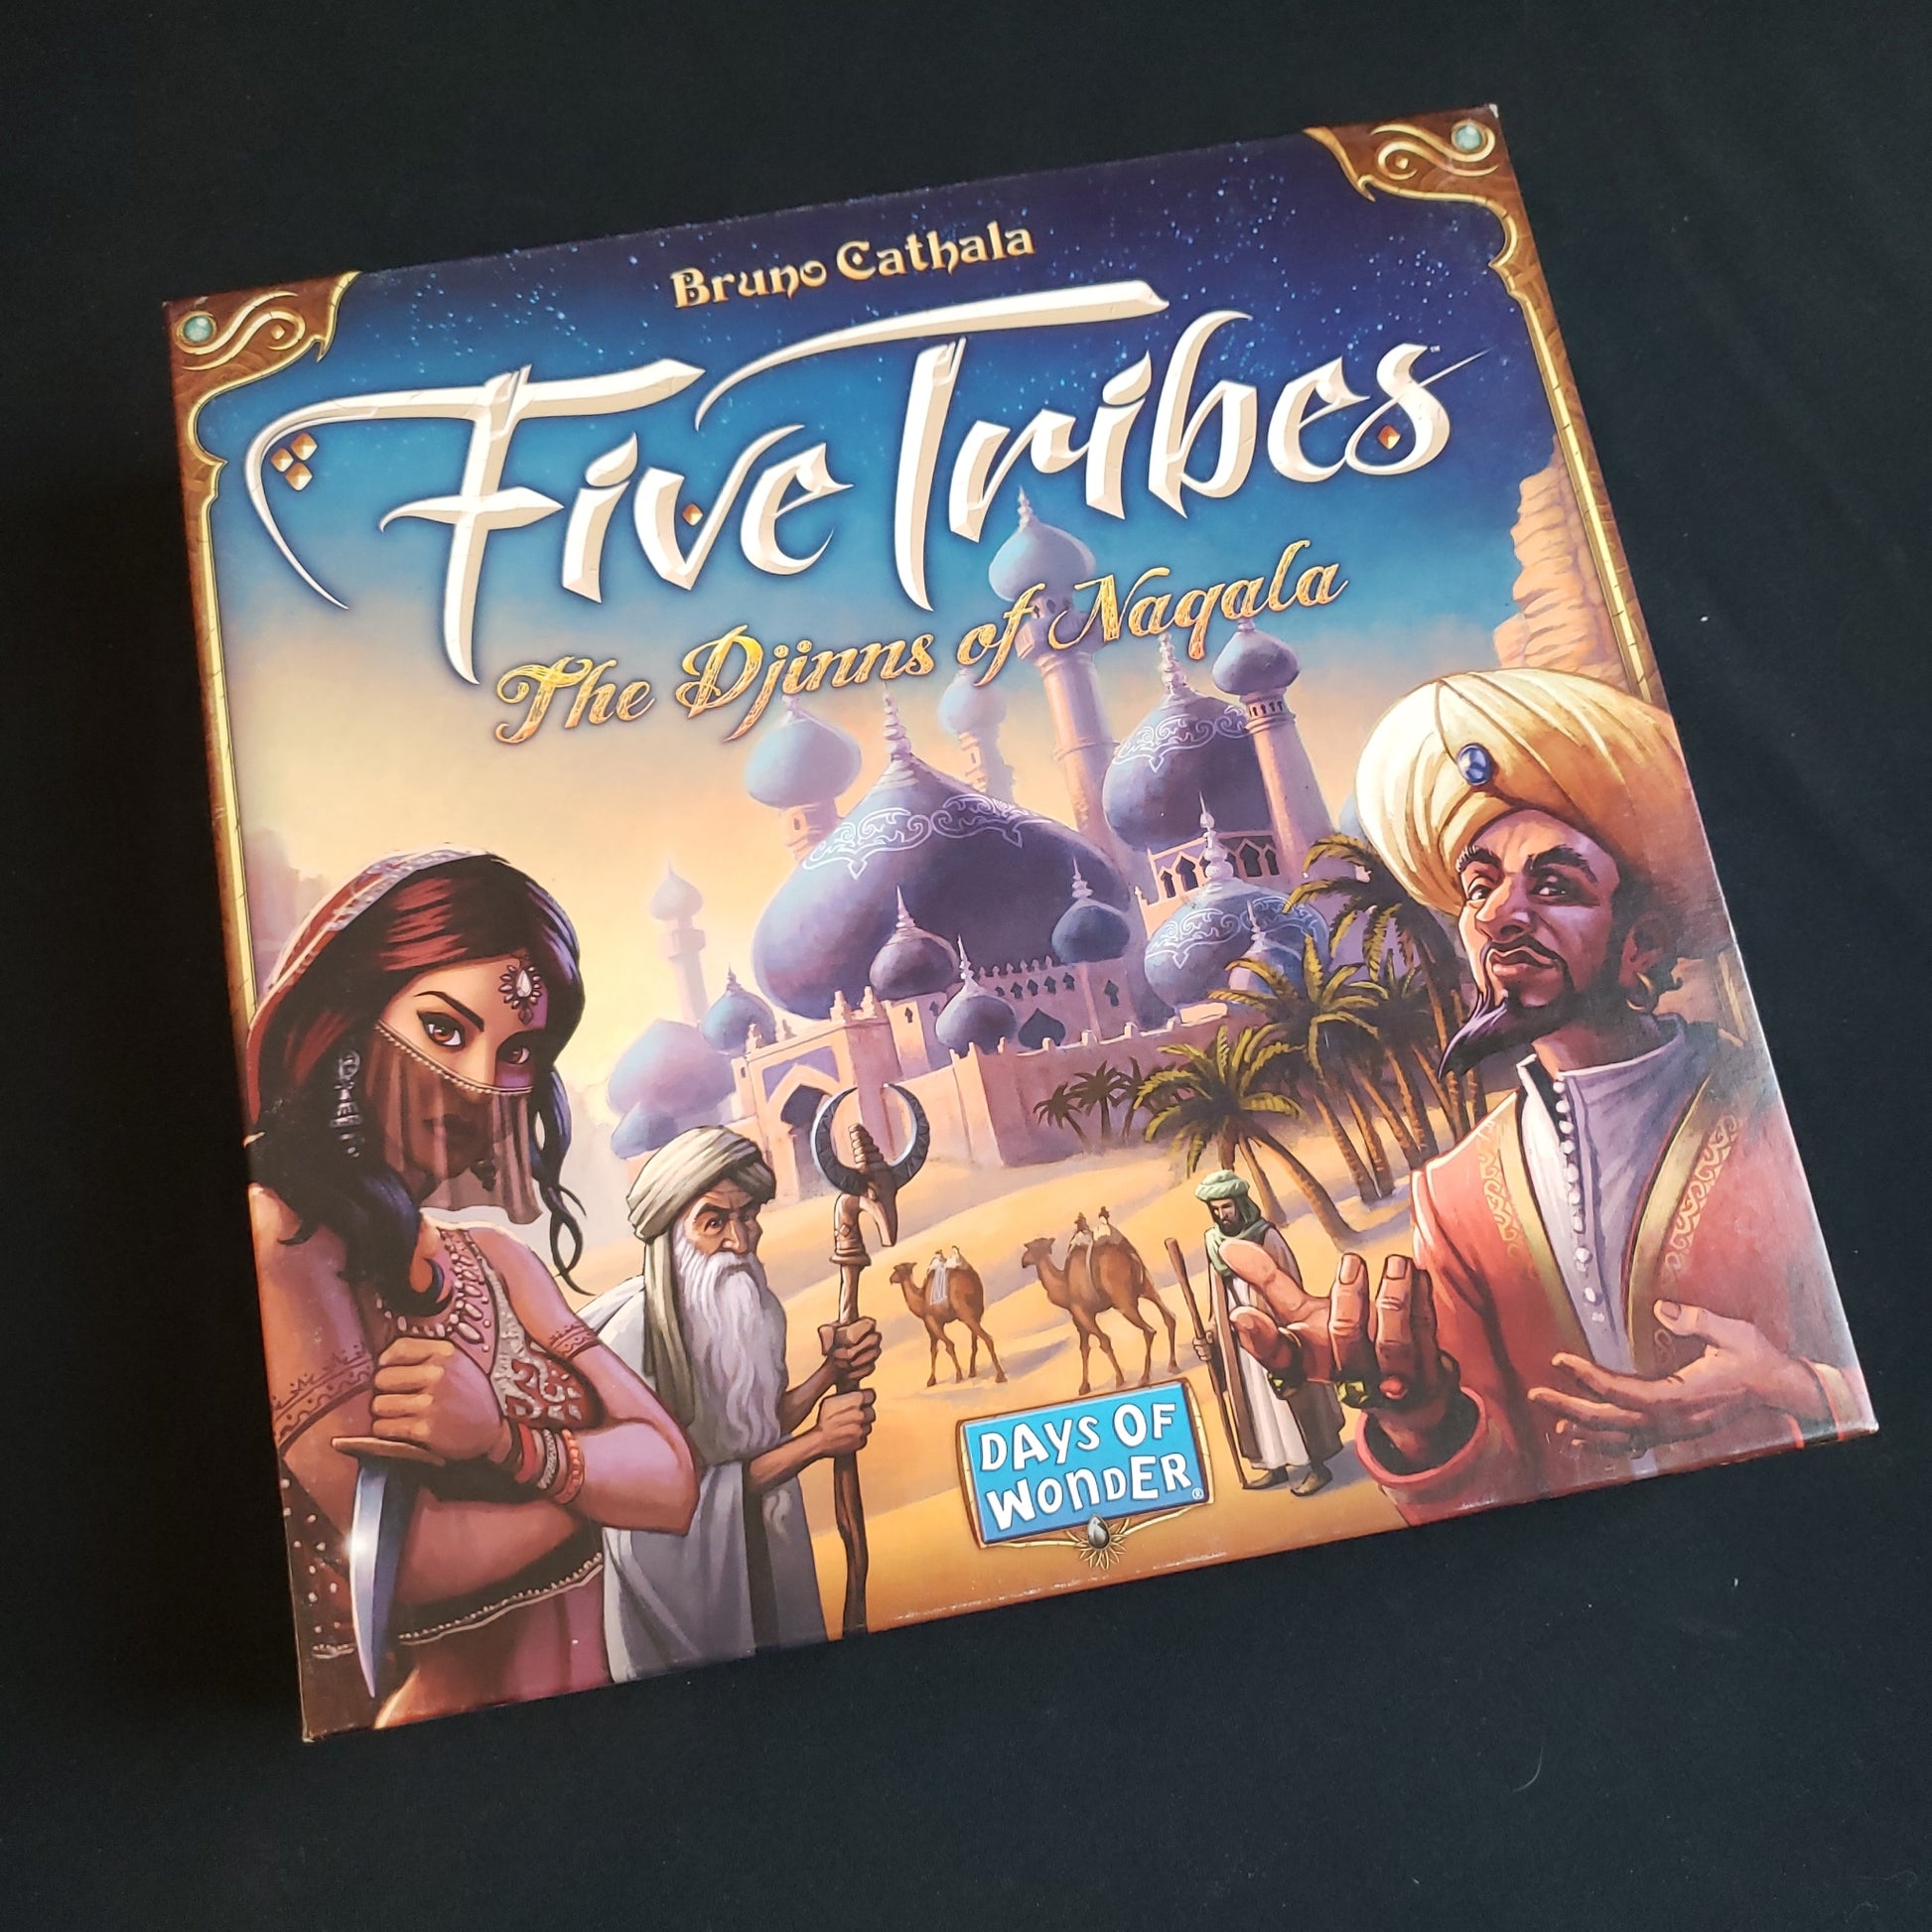 Image shows the front cover of the box of the Five Tribes board game